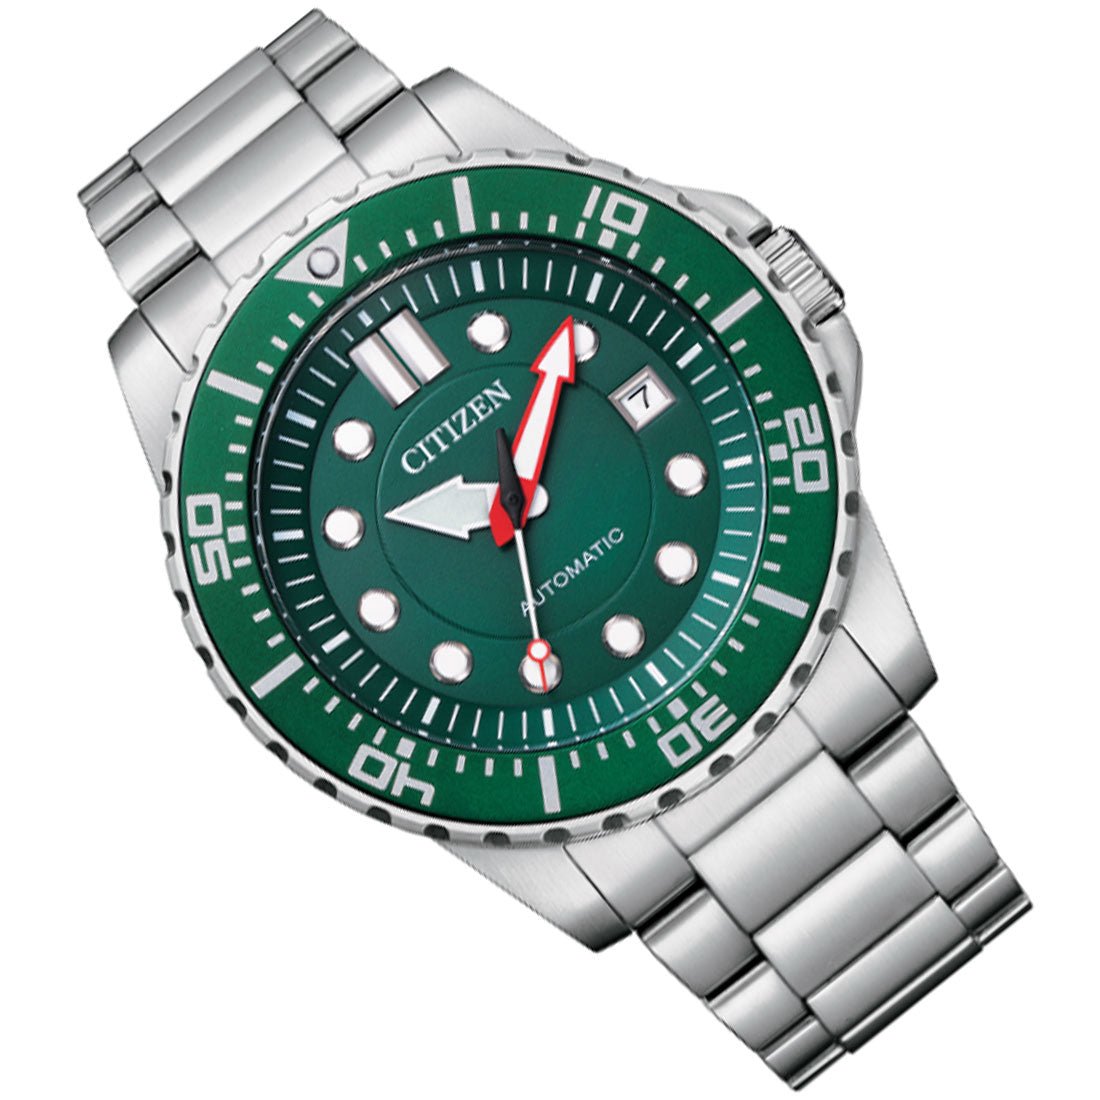 Citizen Promaster NJ0129-87X NJ0129-87 Automatic Green Dial Stainless Steel Sports Watch -Citizen